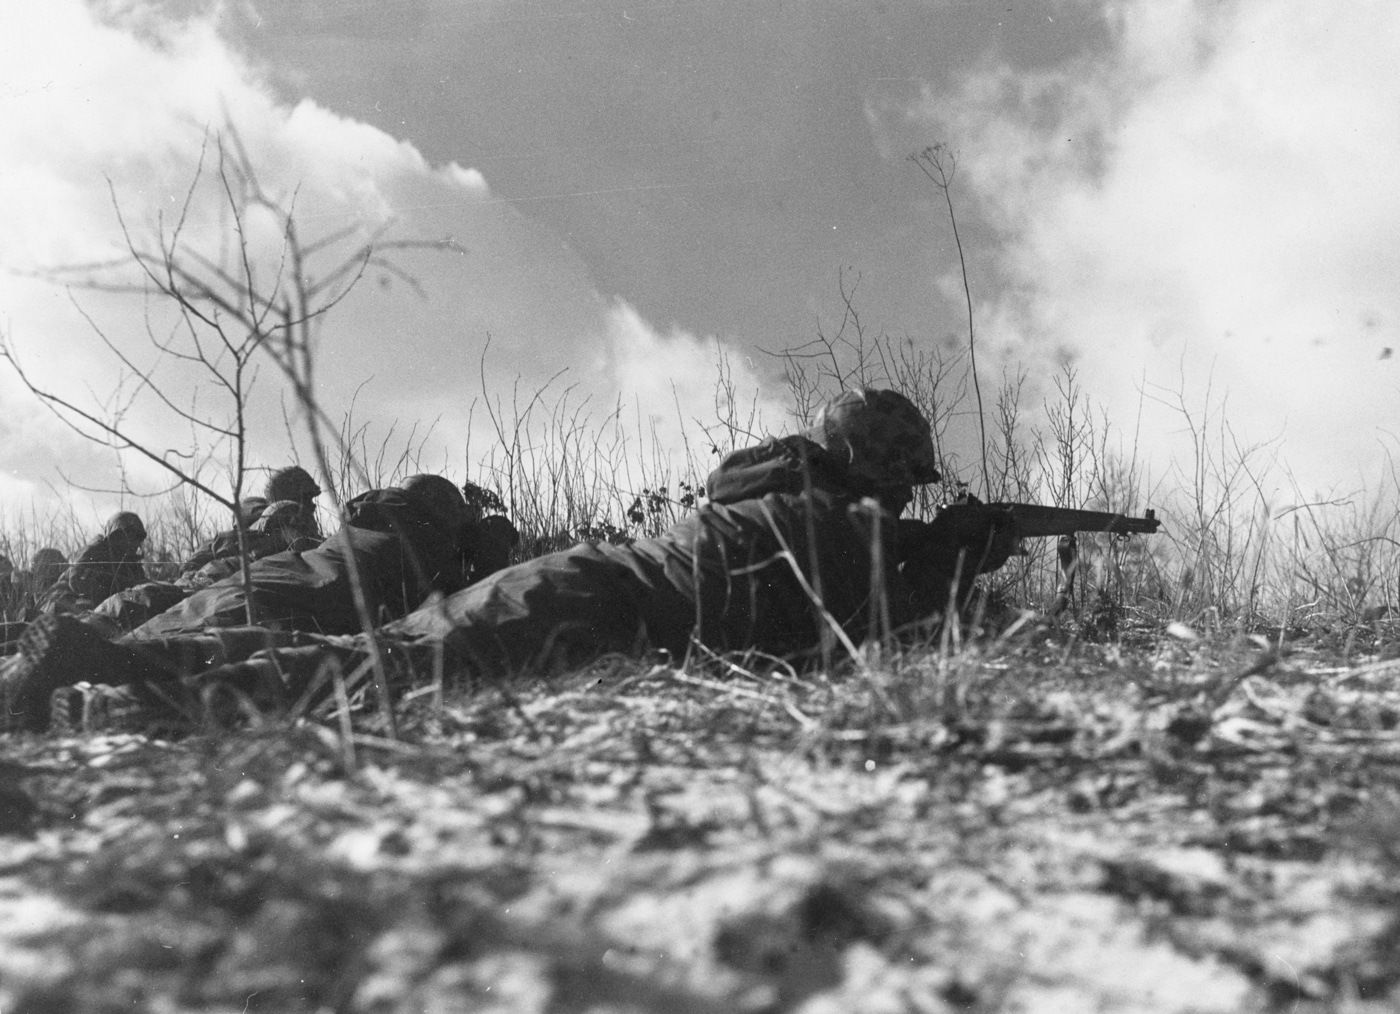 In this photo, we see Marines engage Chinese forces with M1 Garand rifles along a ridge.